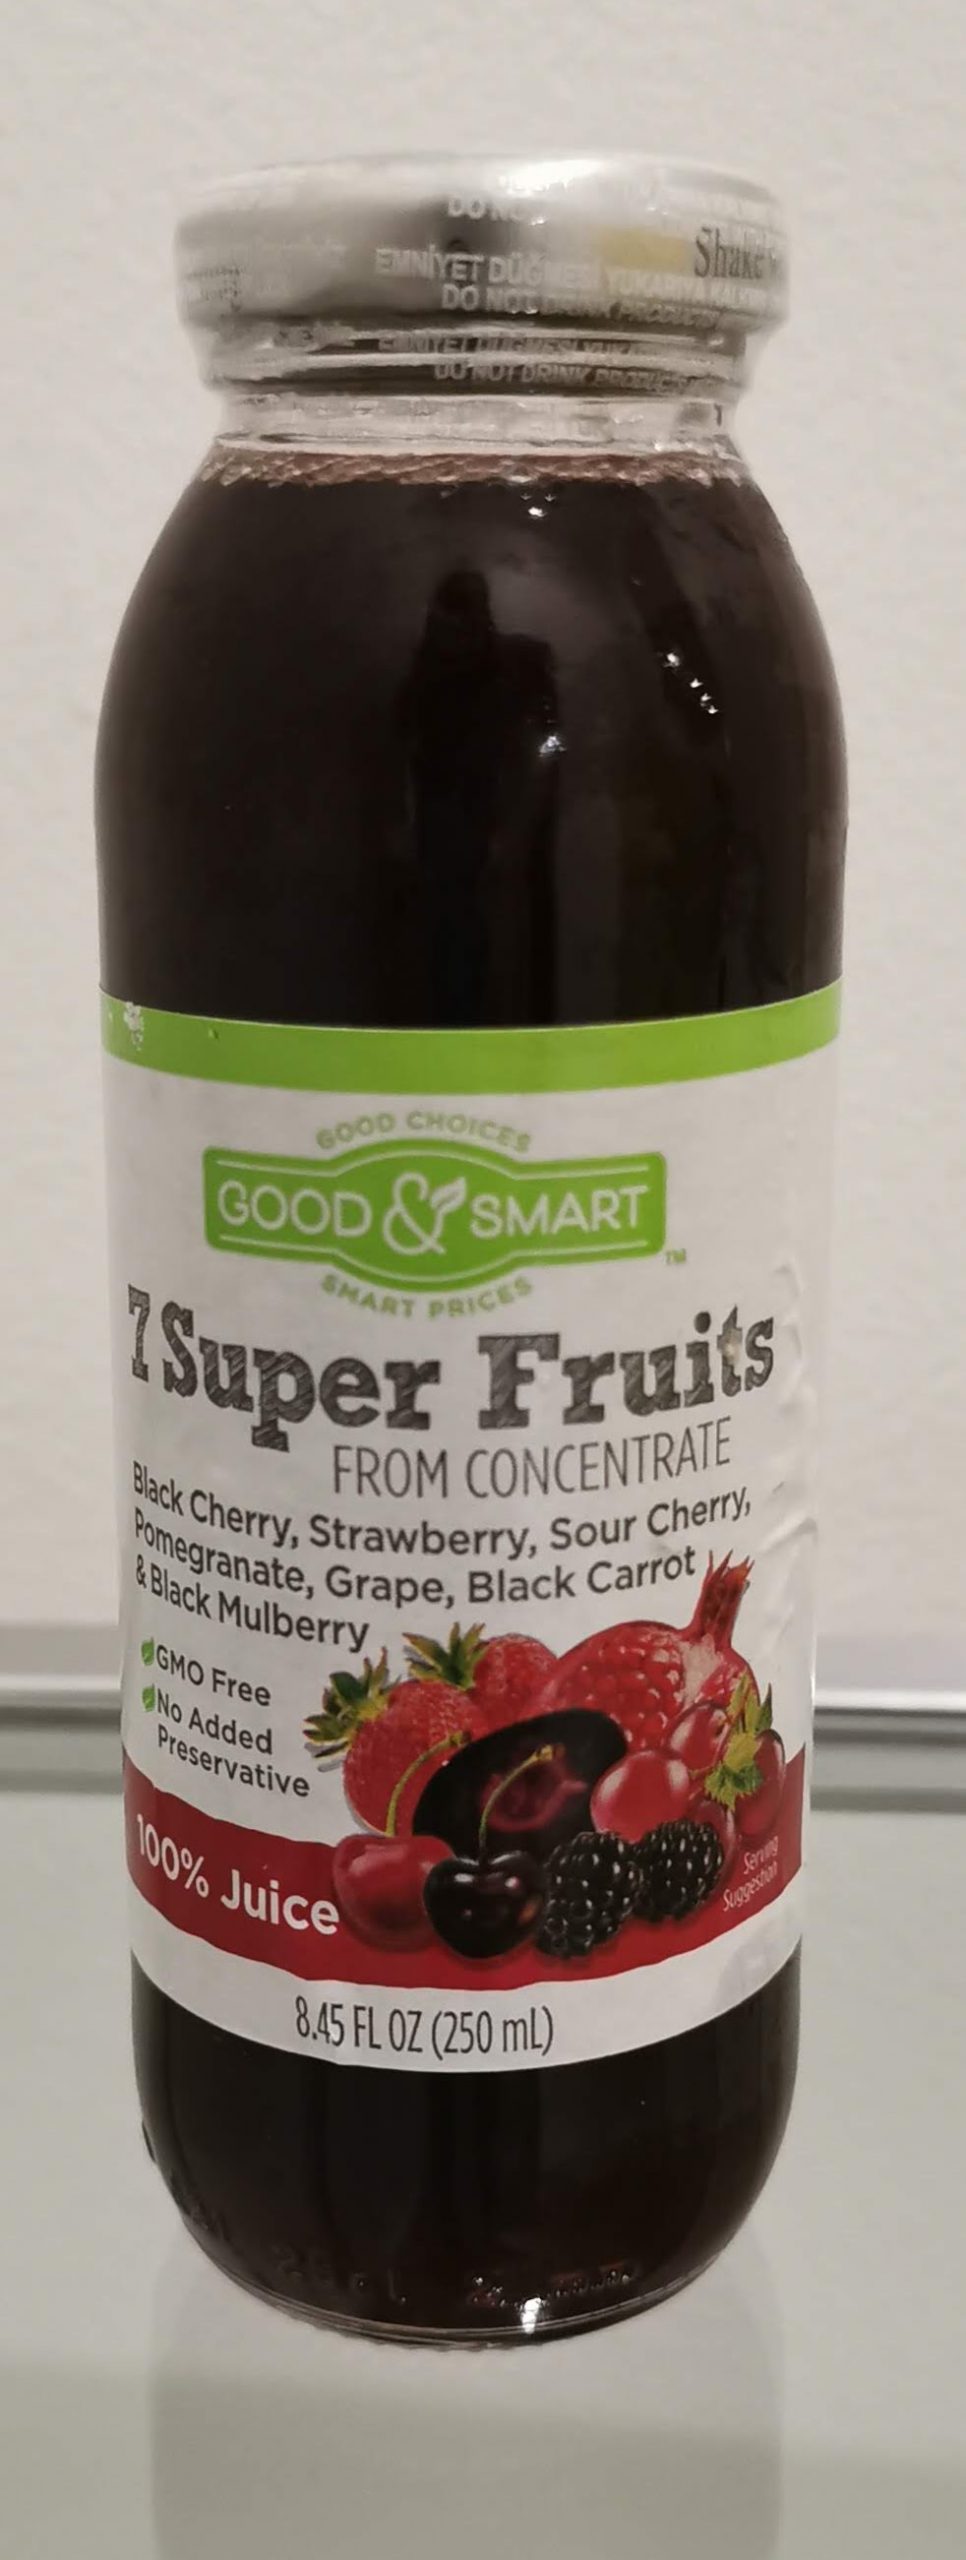 You are currently viewing Good & Smart 7 Super Fruits 100% Juice Drink (Dollar General)